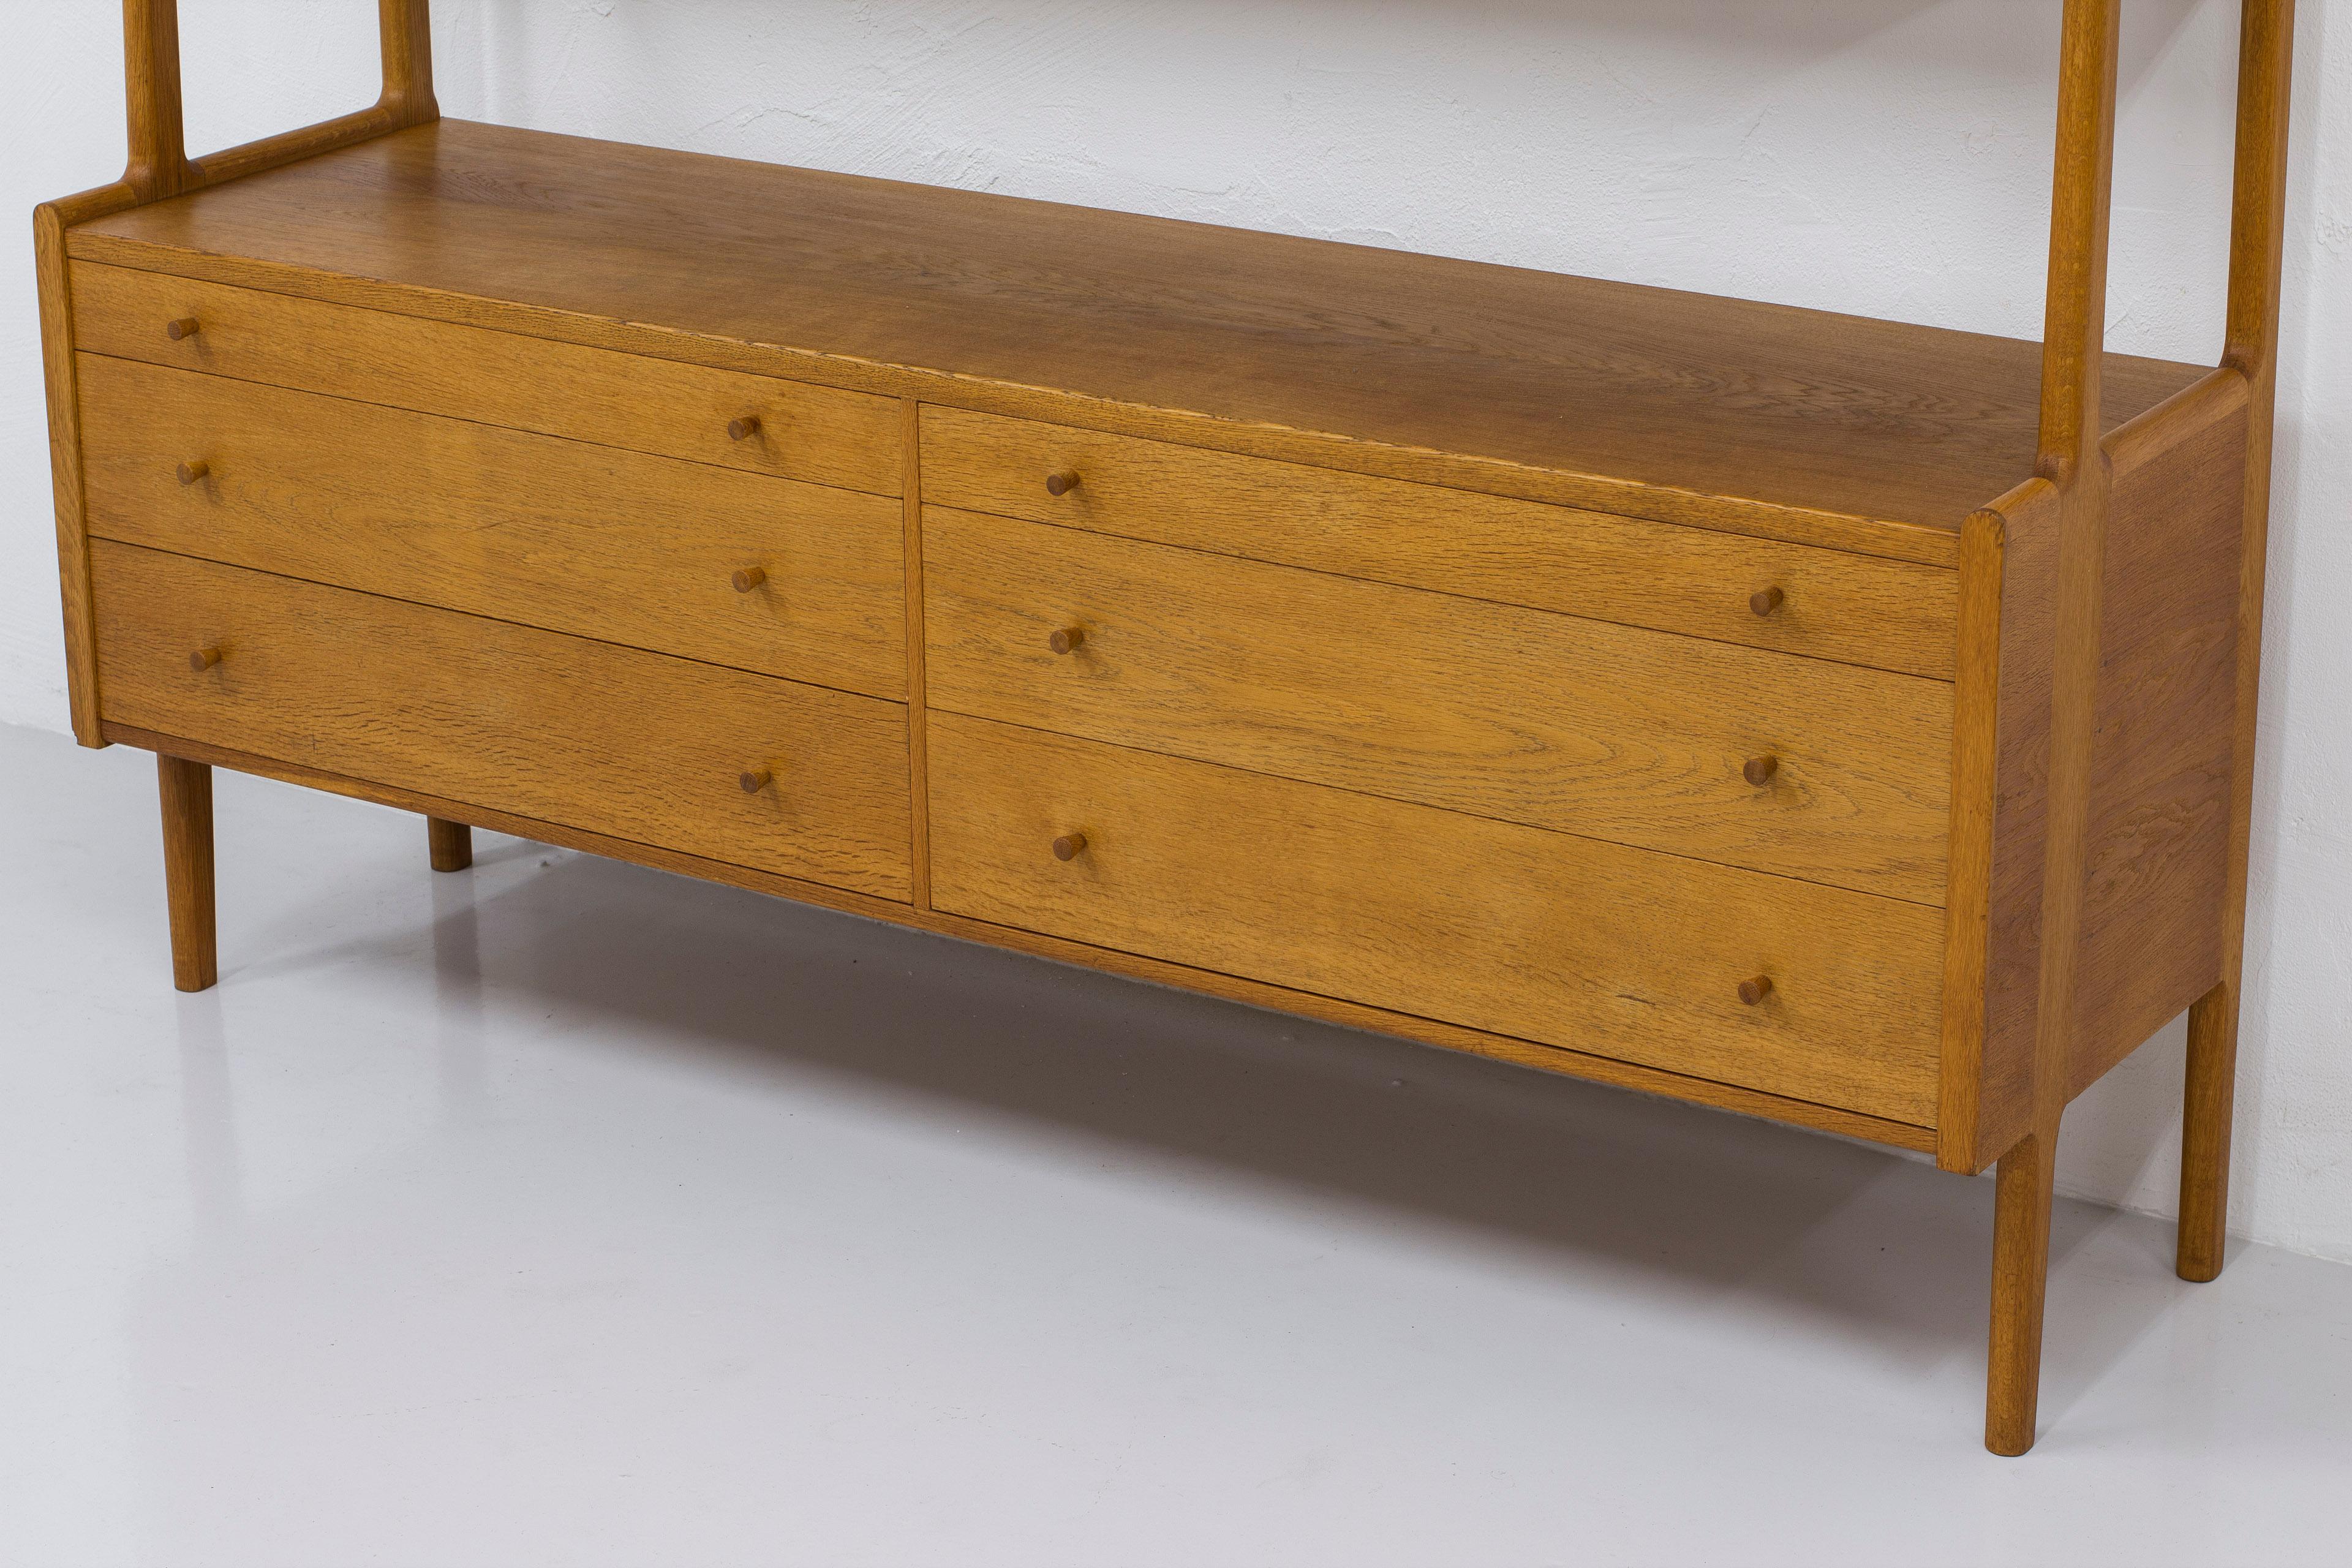 Cane Oak and cane sideboard RY20 by Hans J. Wegner, RY Møbler, 1950s For Sale